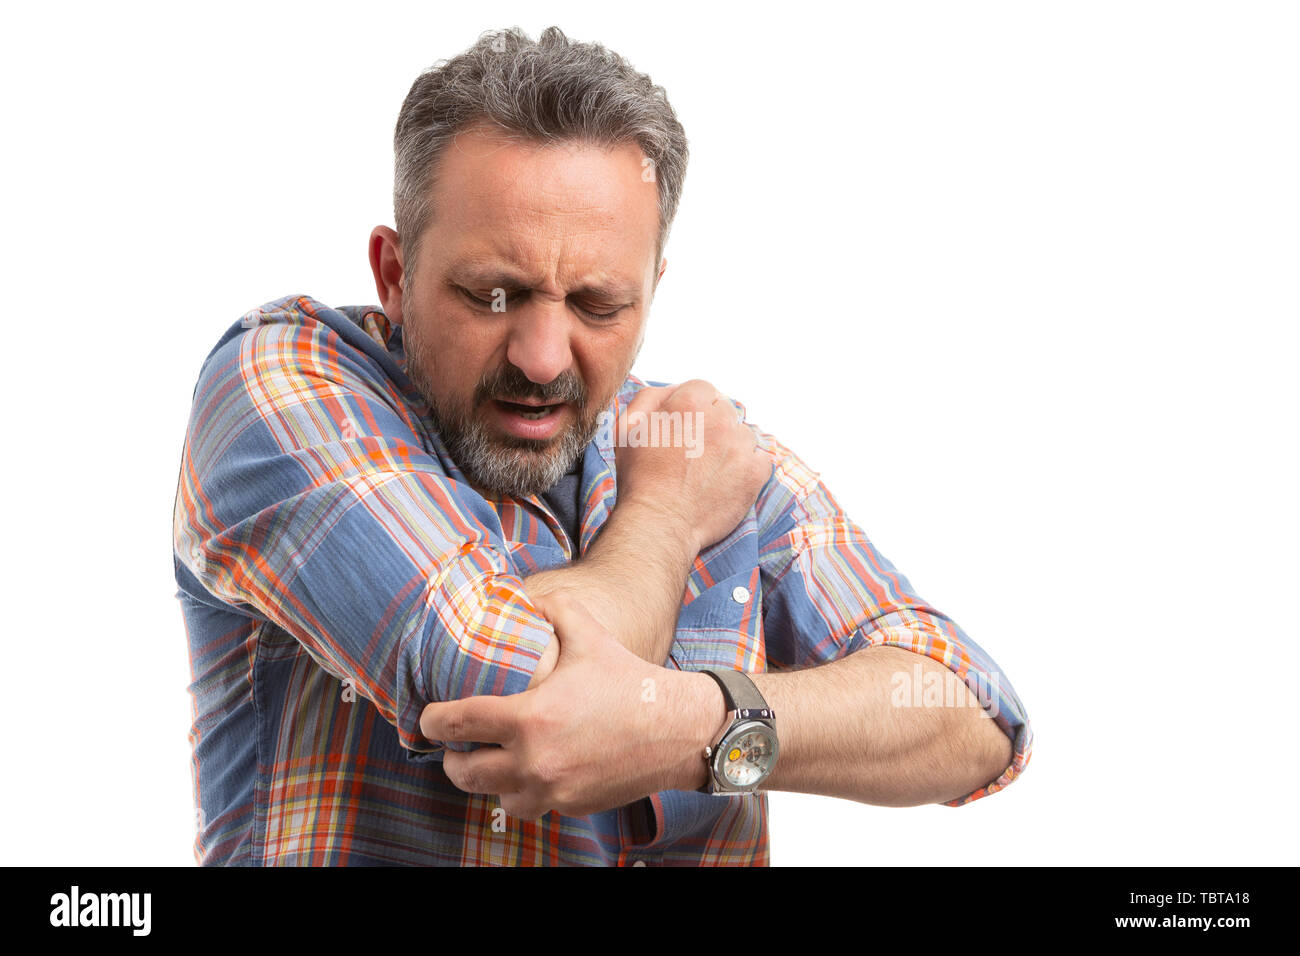 Man Touching Painful Elbow With Hurting Expression As Physical Effort